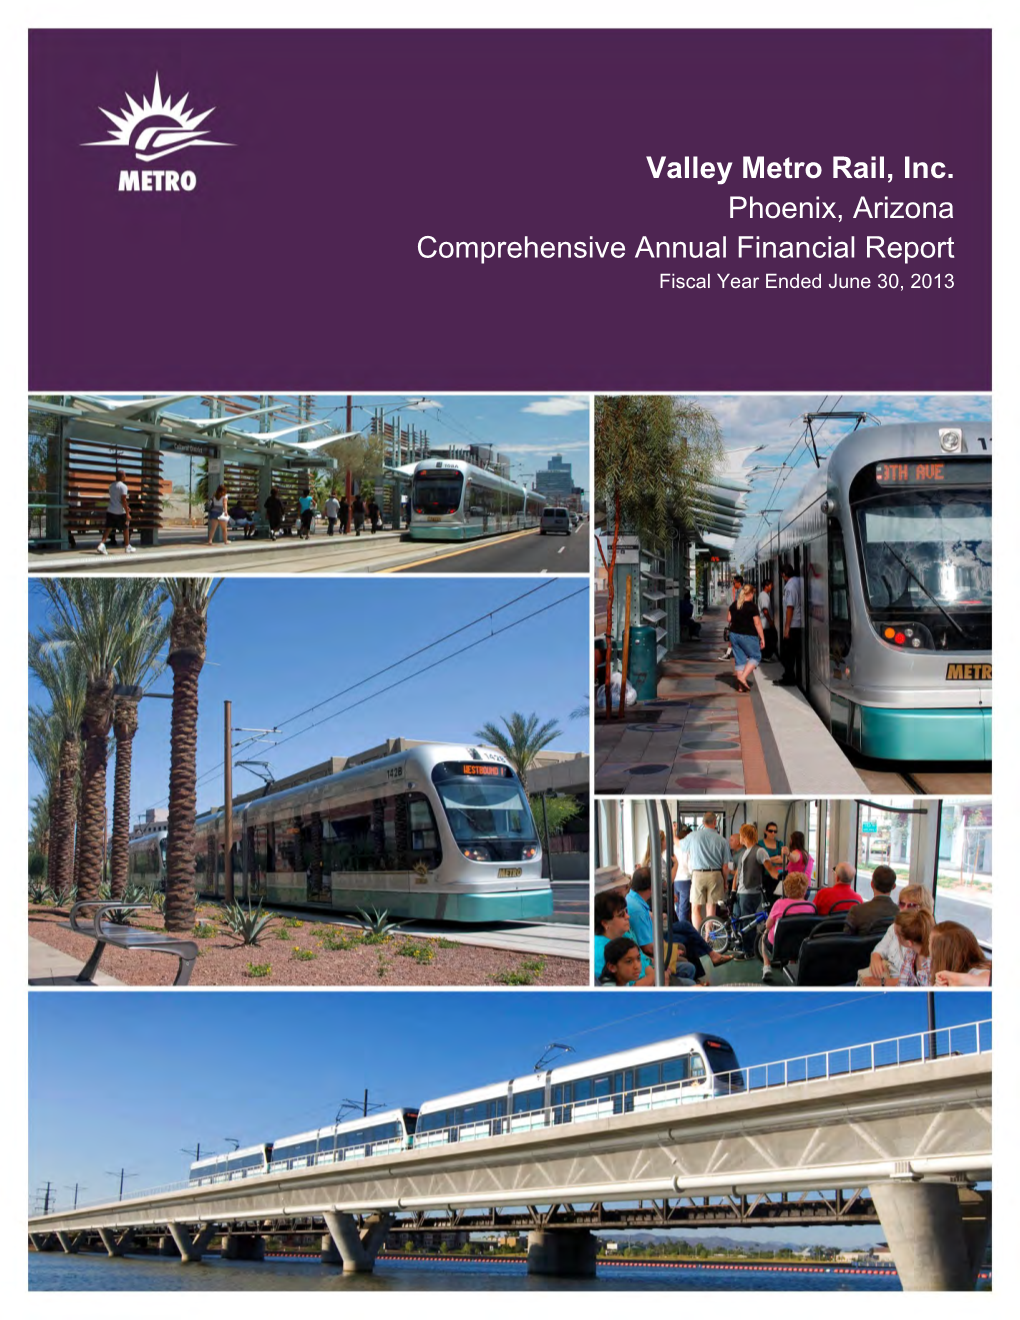 Valley Metro Rail, Inc. Phoenix, Arizona Comprehensive Annual Financial Report Fiscal Year Ended June 30, 2013